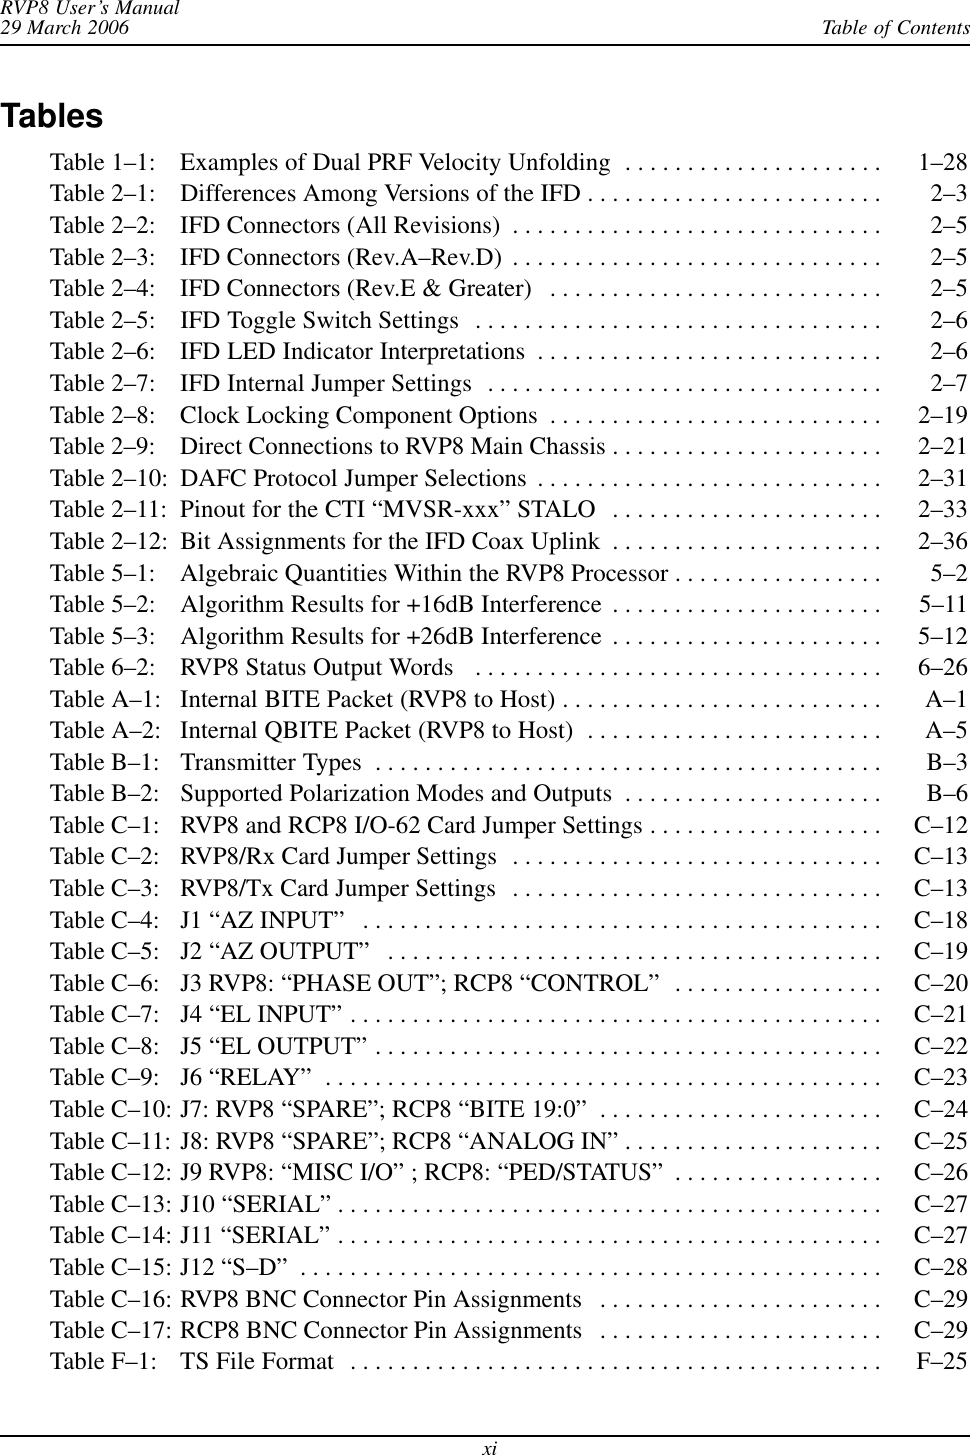 Table of ContentsRVP8 User’s Manual29 March 2006xiTablesTable 1–1: Examples of Dual PRF Velocity Unfolding 1–28 . . . . . . . . . . . . . . . . . . . . . Table 2–1: Differences Among Versions of the IFD 2–3 . . . . . . . . . . . . . . . . . . . . . . . . Table 2–2: IFD Connectors (All Revisions) 2–5 . . . . . . . . . . . . . . . . . . . . . . . . . . . . . . Table 2–3: IFD Connectors (Rev.A–Rev.D) 2–5 . . . . . . . . . . . . . . . . . . . . . . . . . . . . . . Table 2–4: IFD Connectors (Rev.E &amp; Greater) 2–5 . . . . . . . . . . . . . . . . . . . . . . . . . . . Table 2–5: IFD Toggle Switch Settings 2–6 . . . . . . . . . . . . . . . . . . . . . . . . . . . . . . . . . Table 2–6: IFD LED Indicator Interpretations 2–6 . . . . . . . . . . . . . . . . . . . . . . . . . . . . Table 2–7: IFD Internal Jumper Settings 2–7 . . . . . . . . . . . . . . . . . . . . . . . . . . . . . . . . Table 2–8: Clock Locking Component Options 2–19 . . . . . . . . . . . . . . . . . . . . . . . . . . . Table 2–9: Direct Connections to RVP8 Main Chassis 2–21 . . . . . . . . . . . . . . . . . . . . . . Table 2–10: DAFC Protocol Jumper Selections 2–31 . . . . . . . . . . . . . . . . . . . . . . . . . . . . Table 2–11: Pinout for the CTI “MVSR-xxx” STALO 2–33 . . . . . . . . . . . . . . . . . . . . . . Table 2–12: Bit Assignments for the IFD Coax Uplink 2–36 . . . . . . . . . . . . . . . . . . . . . . Table 5–1: Algebraic Quantities Within the RVP8 Processor 5–2 . . . . . . . . . . . . . . . . . Table 5–2: Algorithm Results for +16dB Interference 5–11 . . . . . . . . . . . . . . . . . . . . . . Table 5–3: Algorithm Results for +26dB Interference 5–12 . . . . . . . . . . . . . . . . . . . . . . Table 6–2: RVP8 Status Output Words   6–26 . . . . . . . . . . . . . . . . . . . . . . . . . . . . . . . . . Table A–1: Internal BITE Packet (RVP8 to Host) A–1 . . . . . . . . . . . . . . . . . . . . . . . . . . Table A–2: Internal QBITE Packet (RVP8 to Host) A–5 . . . . . . . . . . . . . . . . . . . . . . . . Table B–1: Transmitter Types B–3 . . . . . . . . . . . . . . . . . . . . . . . . . . . . . . . . . . . . . . . . . Table B–2: Supported Polarization Modes and Outputs B–6 . . . . . . . . . . . . . . . . . . . . . Table C–1: RVP8 and RCP8 I/O-62 Card Jumper Settings C–12 . . . . . . . . . . . . . . . . . . . Table C–2: RVP8/Rx Card Jumper Settings C–13 . . . . . . . . . . . . . . . . . . . . . . . . . . . . . . Table C–3: RVP8/Tx Card Jumper Settings C–13 . . . . . . . . . . . . . . . . . . . . . . . . . . . . . . Table C–4: J1 “AZ INPUT” C–18 . . . . . . . . . . . . . . . . . . . . . . . . . . . . . . . . . . . . . . . . . . Table C–5: J2 “AZ OUTPUT” C–19 . . . . . . . . . . . . . . . . . . . . . . . . . . . . . . . . . . . . . . . . Table C–6: J3 RVP8: “PHASE OUT”; RCP8 “CONTROL” C–20 . . . . . . . . . . . . . . . . . Table C–7: J4 “EL INPUT” C–21 . . . . . . . . . . . . . . . . . . . . . . . . . . . . . . . . . . . . . . . . . . . Table C–8: J5 “EL OUTPUT” C–22 . . . . . . . . . . . . . . . . . . . . . . . . . . . . . . . . . . . . . . . . . Table C–9: J6 “RELAY” C–23 . . . . . . . . . . . . . . . . . . . . . . . . . . . . . . . . . . . . . . . . . . . . . Table C–10: J7: RVP8 “SPARE”; RCP8 “BITE 19:0” C–24 . . . . . . . . . . . . . . . . . . . . . . . Table C–11: J8: RVP8 “SPARE”; RCP8 “ANALOG IN” C–25 . . . . . . . . . . . . . . . . . . . . . Table C–12: J9 RVP8: “MISC I/O” ; RCP8: “PED/STATUS” C–26 . . . . . . . . . . . . . . . . . Table C–13: J10 “SERIAL” C–27 . . . . . . . . . . . . . . . . . . . . . . . . . . . . . . . . . . . . . . . . . . . . Table C–14: J11 “SERIAL” C–27 . . . . . . . . . . . . . . . . . . . . . . . . . . . . . . . . . . . . . . . . . . . . Table C–15: J12 “S–D” C–28 . . . . . . . . . . . . . . . . . . . . . . . . . . . . . . . . . . . . . . . . . . . . . . . Table C–16: RVP8 BNC Connector Pin Assignments C–29 . . . . . . . . . . . . . . . . . . . . . . . Table C–17: RCP8 BNC Connector Pin Assignments C–29 . . . . . . . . . . . . . . . . . . . . . . . Table F–1: TS File Format F–25 . . . . . . . . . . . . . . . . . . . . . . . . . . . . . . . . . . . . . . . . . . . 